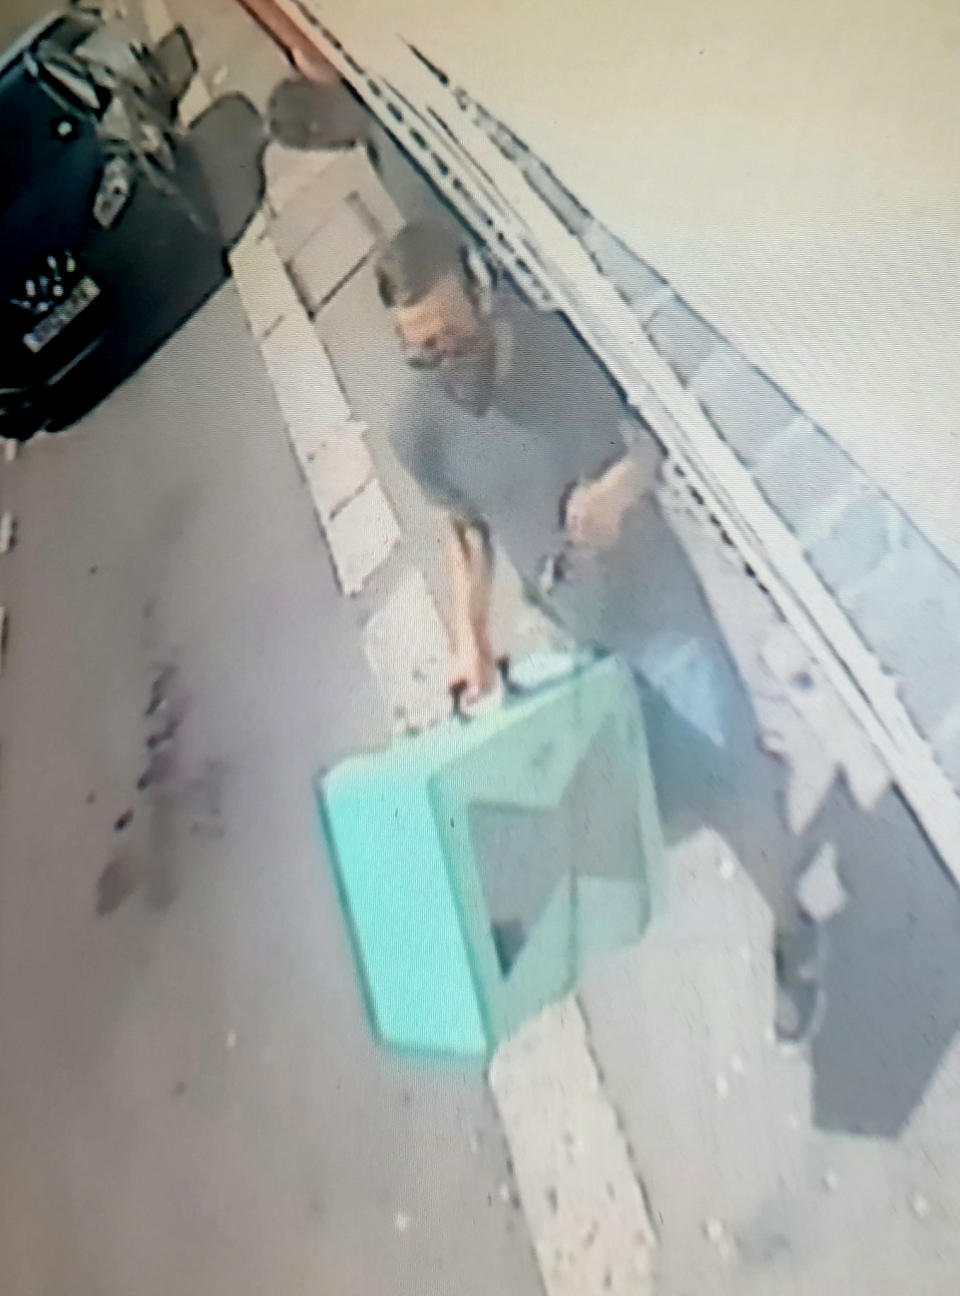 **EMBARGOED UNTIL 2PM BST / JULY 1, 2021**

CCTV of burglar in the pub and removing guitar and other goods to his car outside.  A brazen thief caught on camera stealing £5,000 worth of gear in Dover couldn't be nicked because he had left England by going through customs and was waiting for a ferry to France.  See SWNS story SWNNburglar.  The Italian committed the 'perfect crime' by raiding a pub and driving into a Channel ferry port - a few hundred yards away.  Once there, he couldn't be arrested - by Dover cops or the gendarme - despite being pointed out by the enraged victim.  He was deemed to be on French soil - while the burglary had been committed on British soil.  The bearded suspect, a 31 year old called Luca is understood to have arrived safely home in Italy.  Publican Jemima Burne, 29, was tipped off about the daylight raid by builders working at the Castle Inn.  He timed it to coincide with his hasty departure. He calmly strolled into the bar helping himself to a rare guitar, an amp and a variety of other goods.  He was caught on CCTV around 1pm on June 9 loading his swag into a dark blue Peugeot - and made off. But furious Jemima tracked him down - into the nearby terminal. 